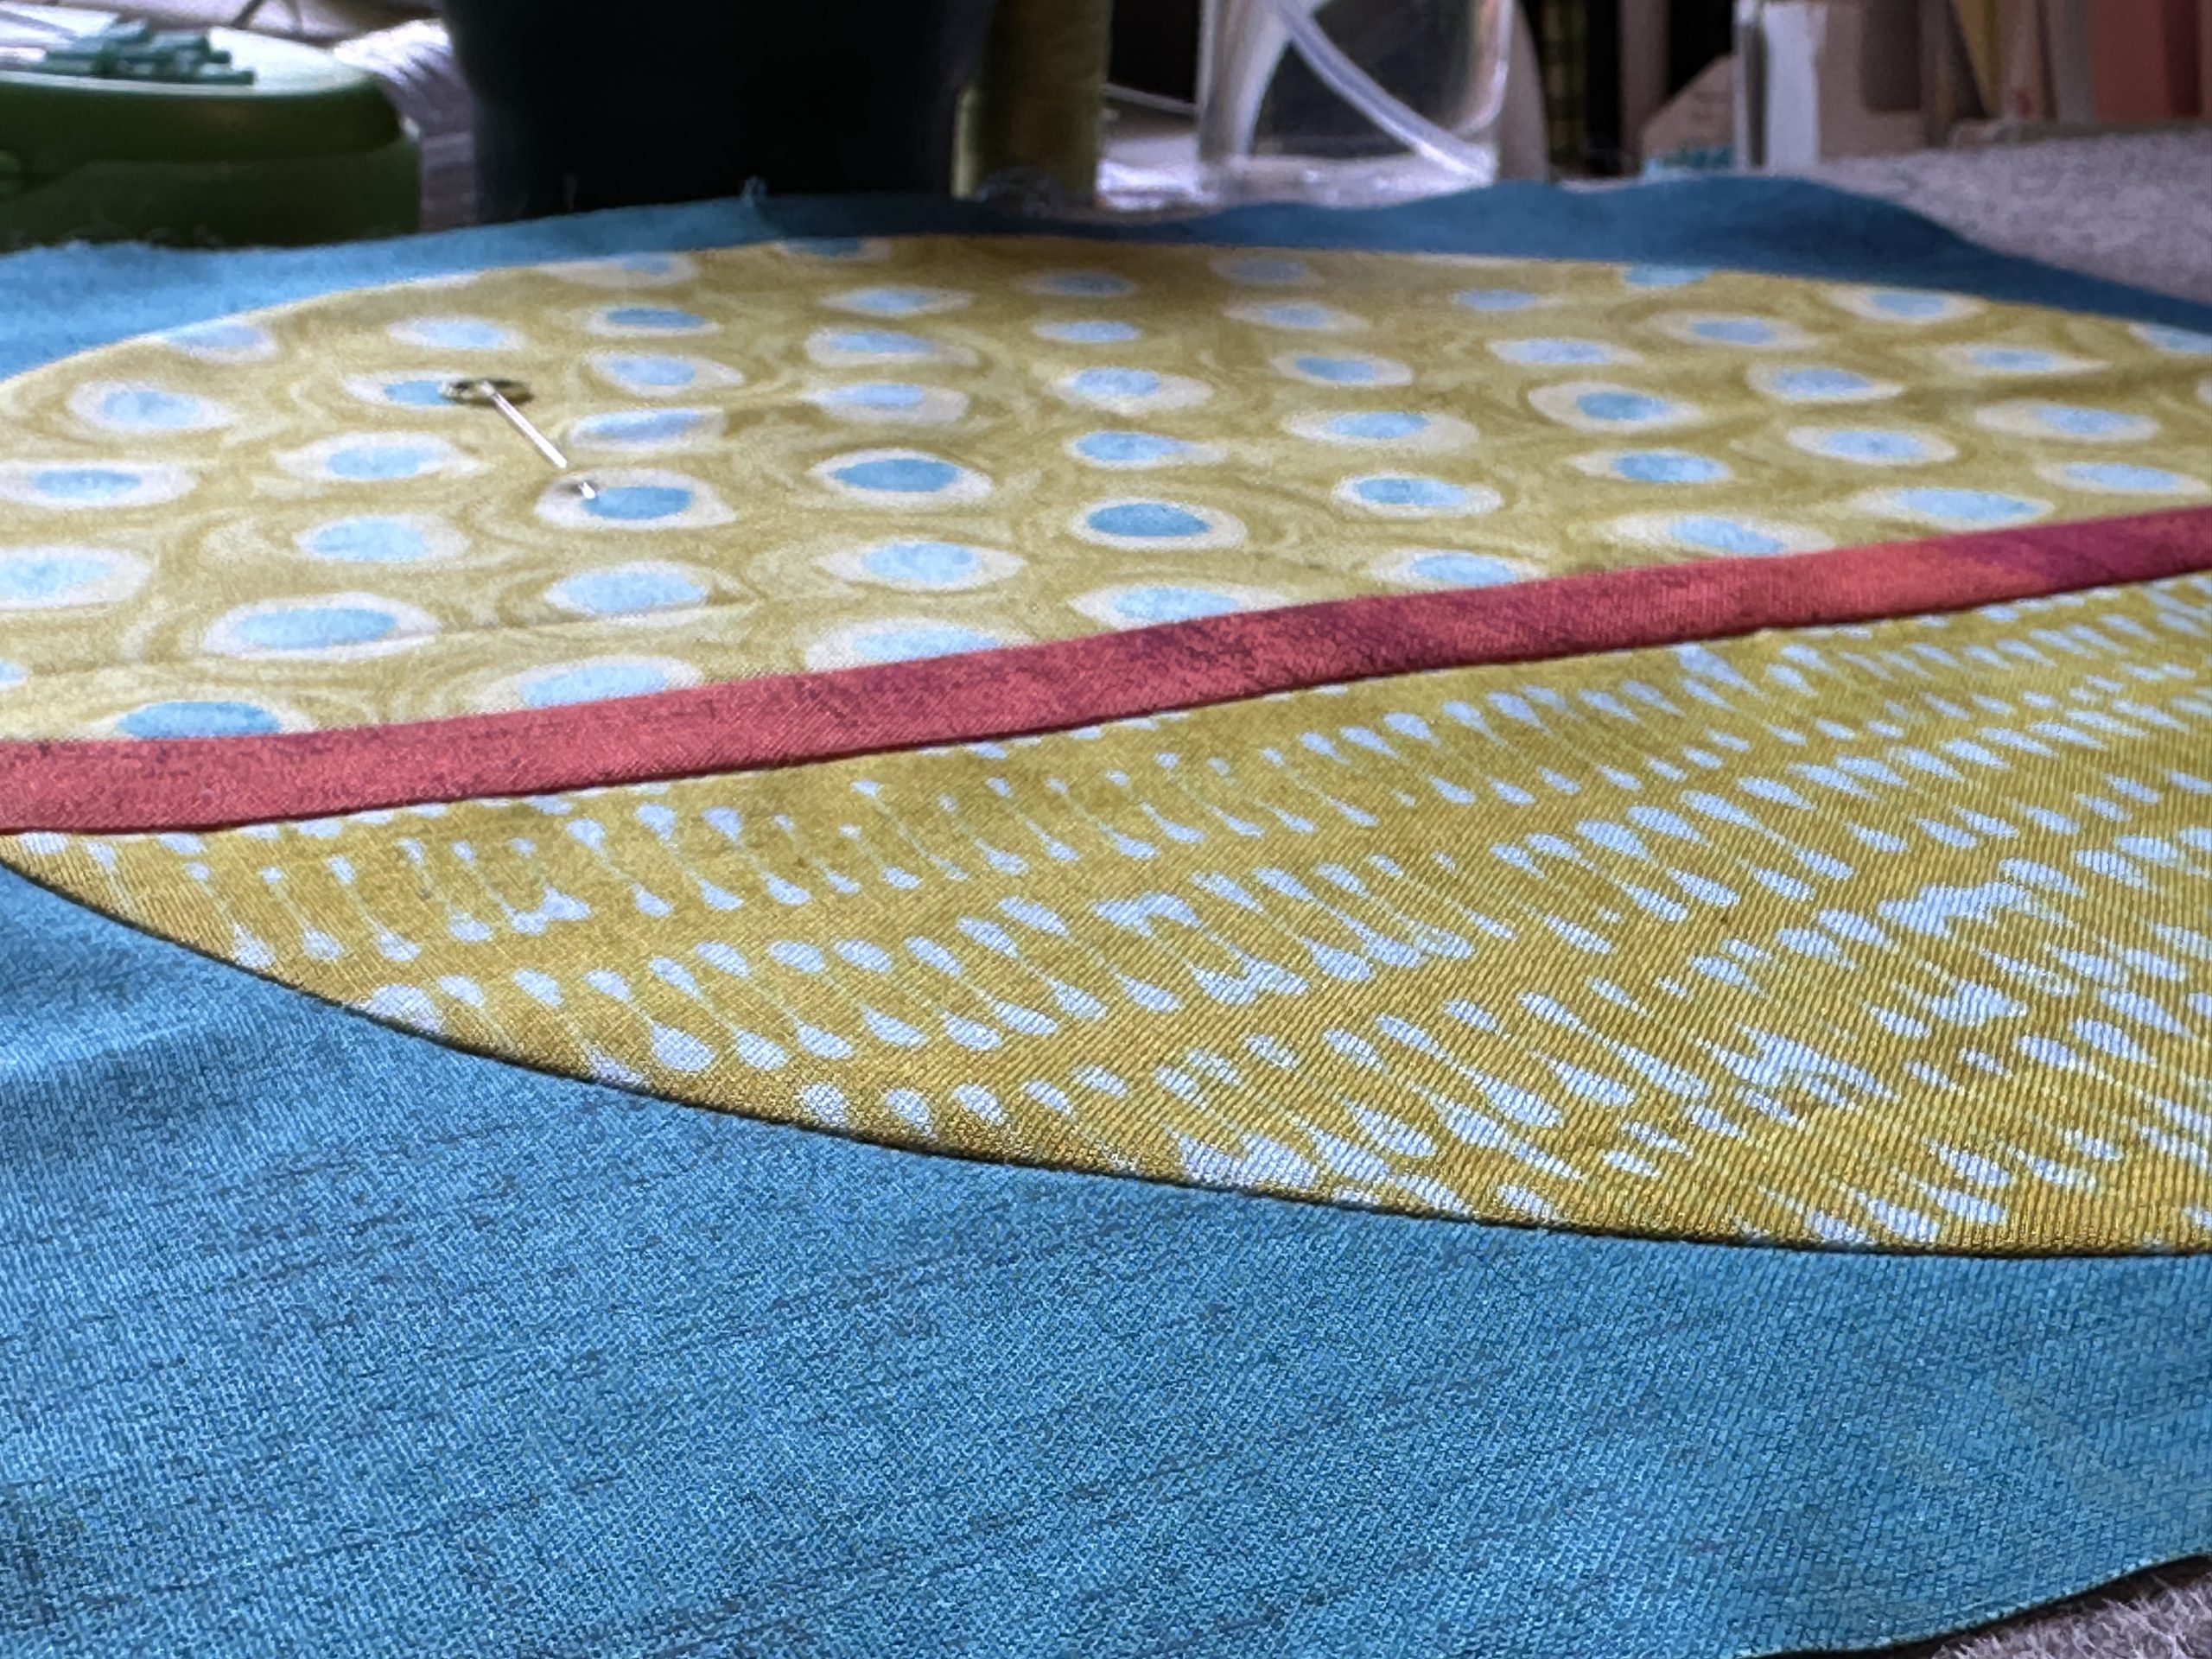 Introduction to Free Motion Quilting with rulers or templates - Sewing By  Sarah